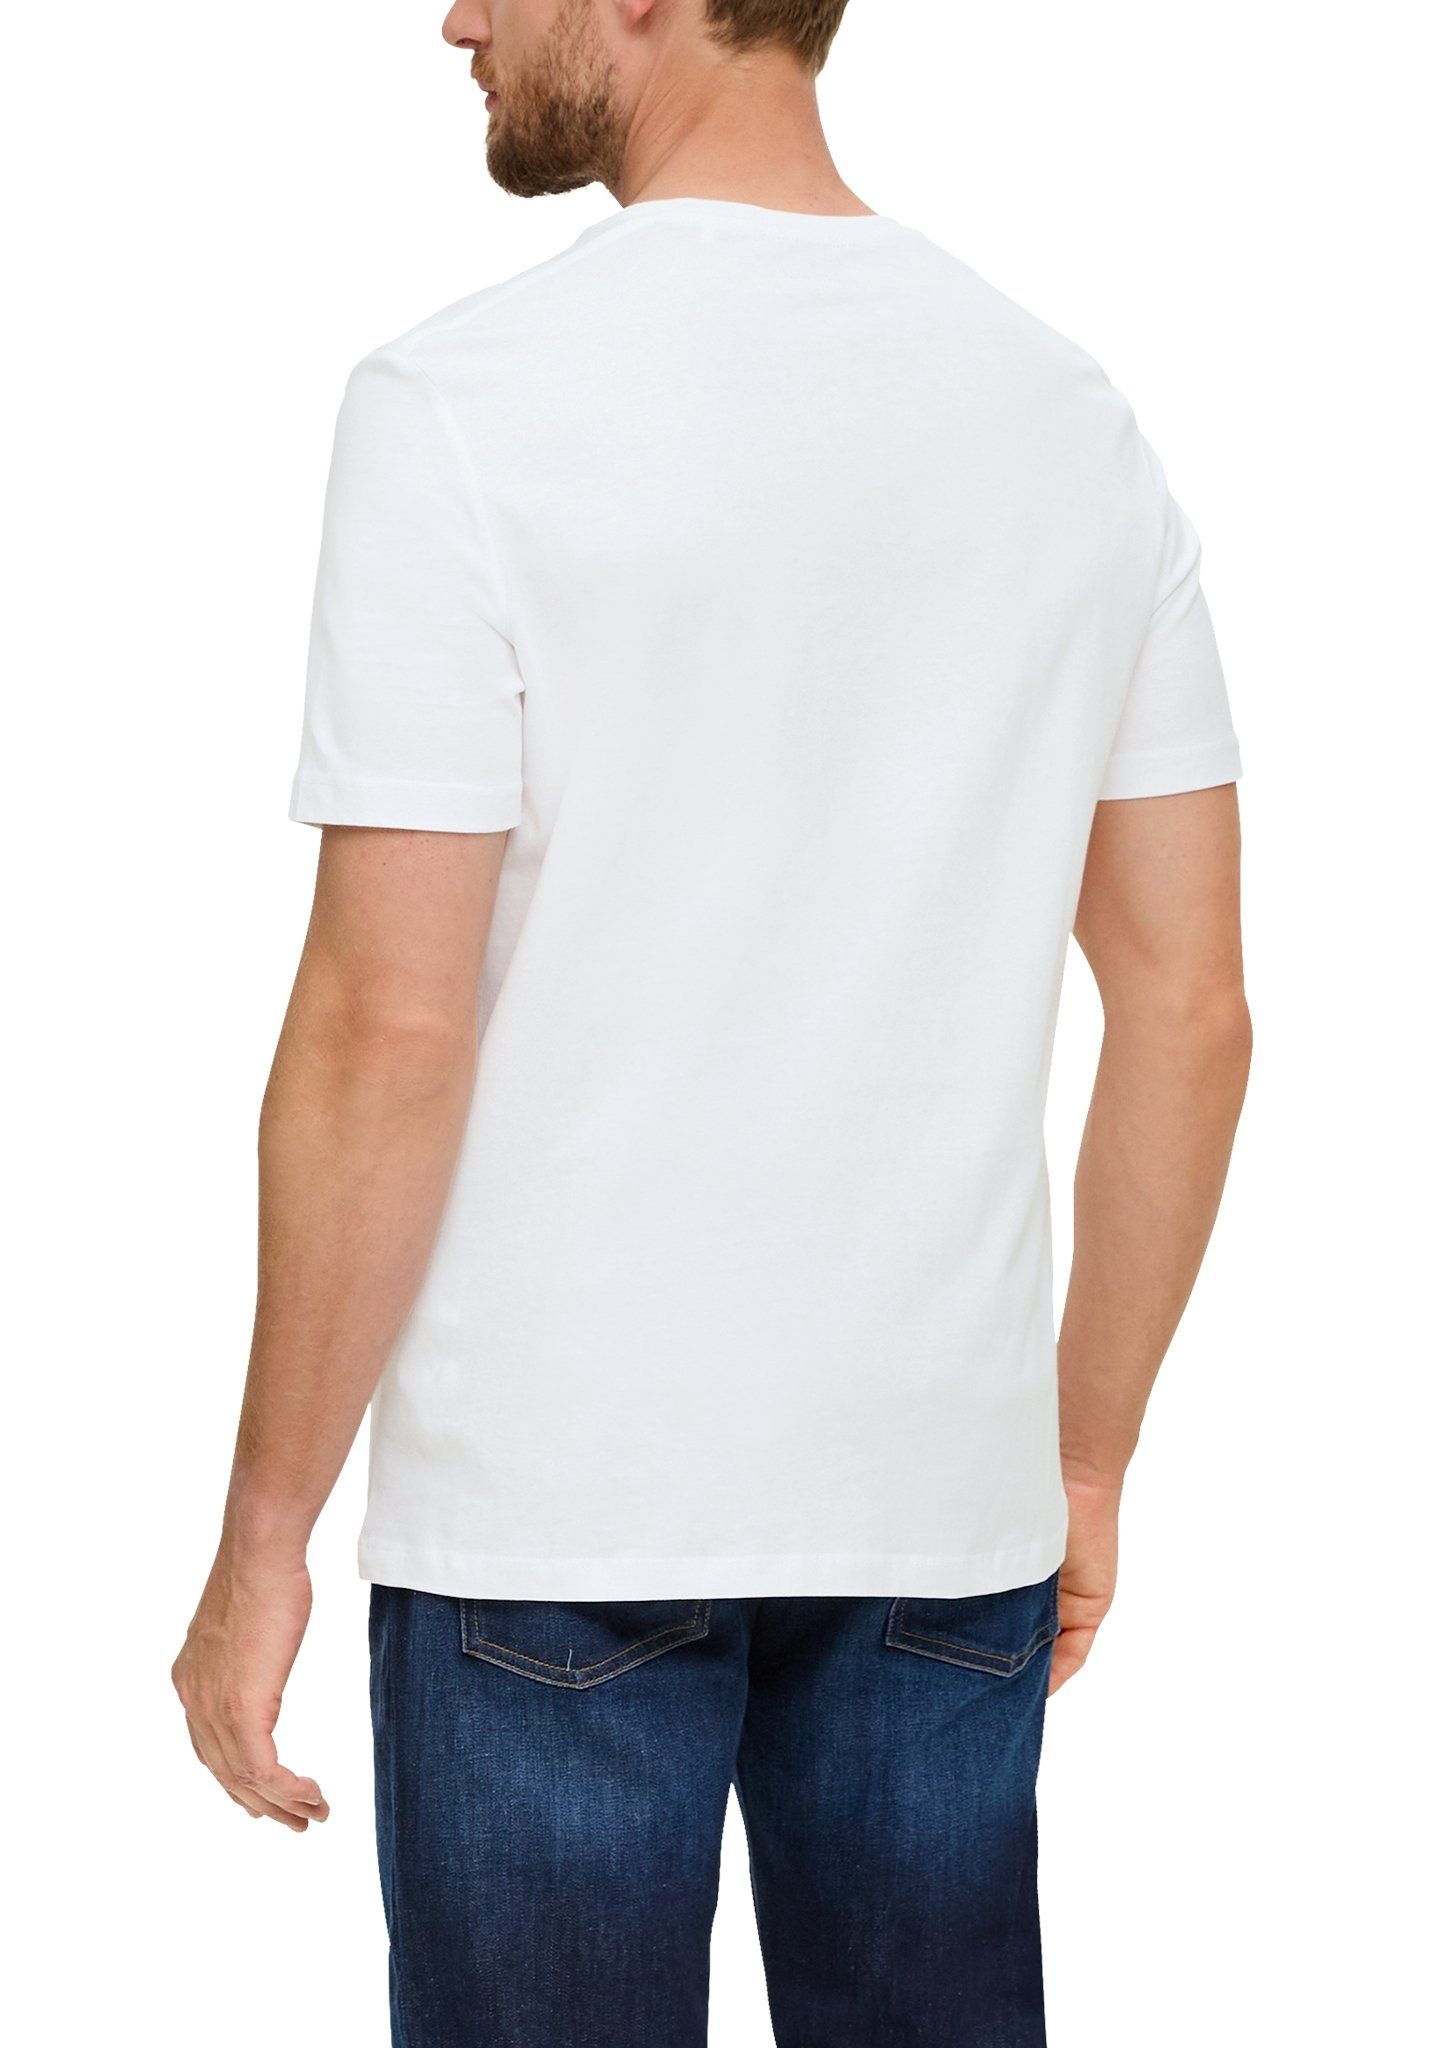 s.Oliver T-Shirt sportiven im white Look